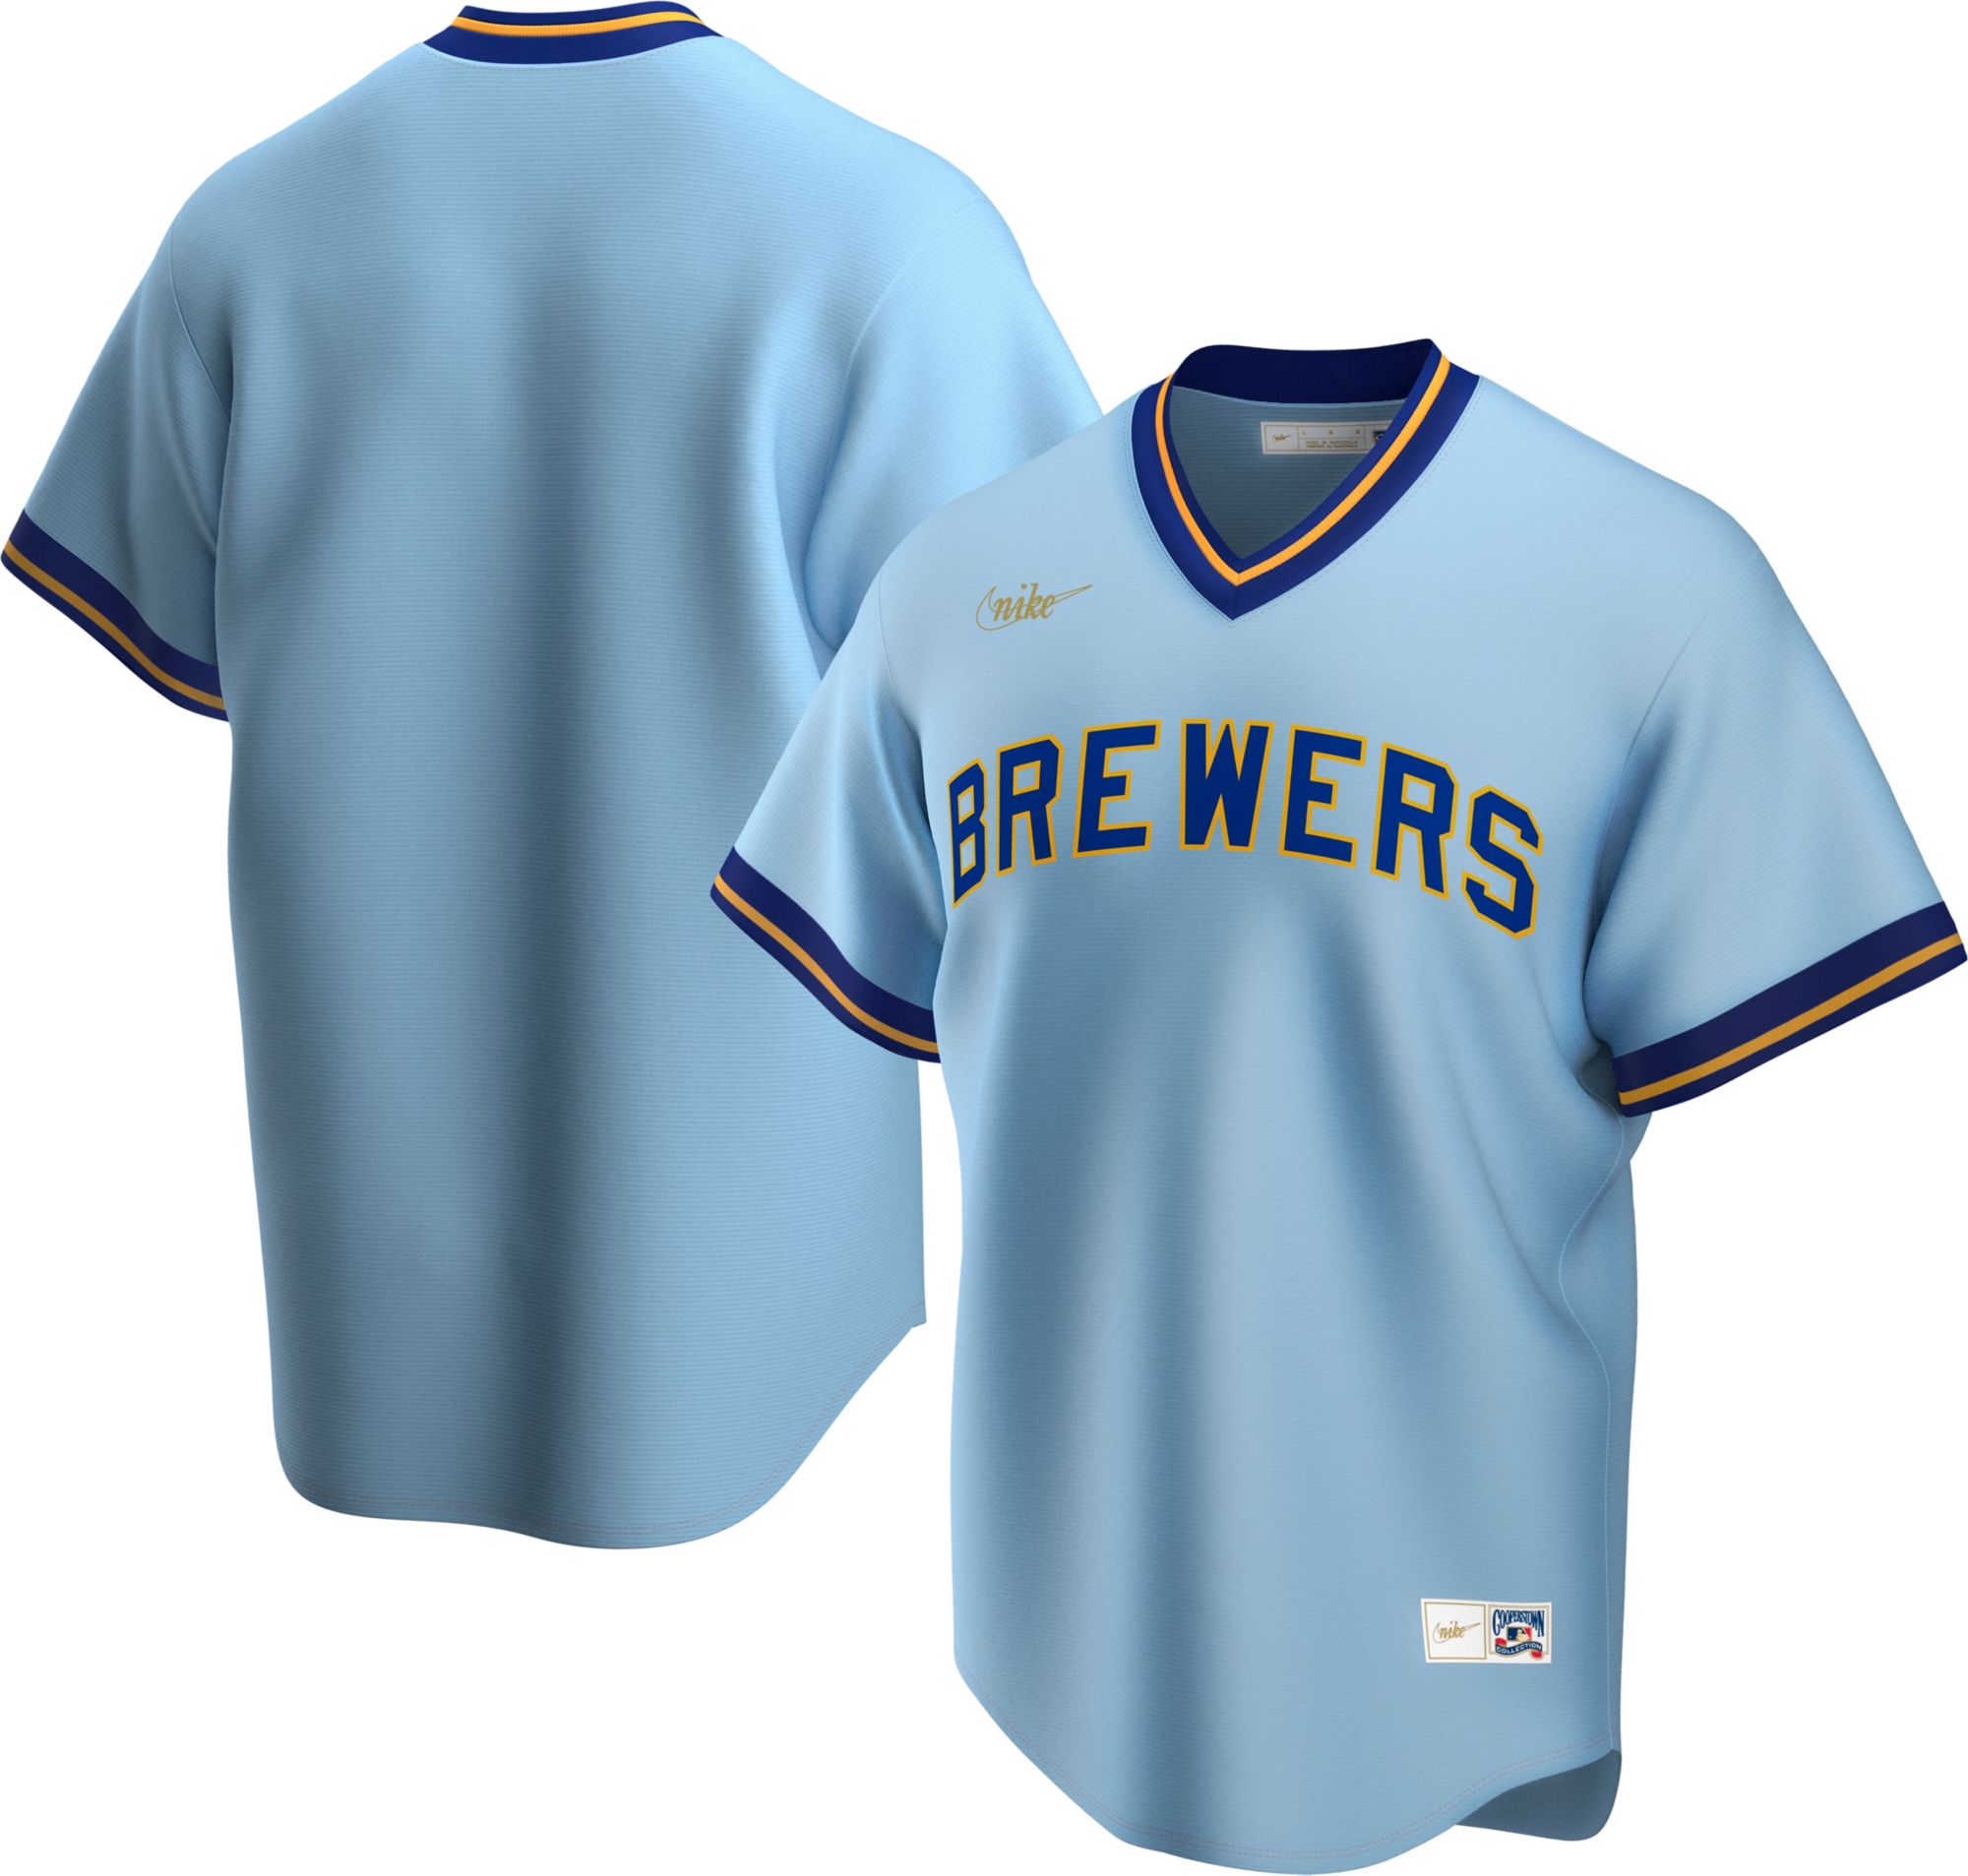 These new Brewers jerseys are absolute fire 🔥 #brewers #brewersbaseba